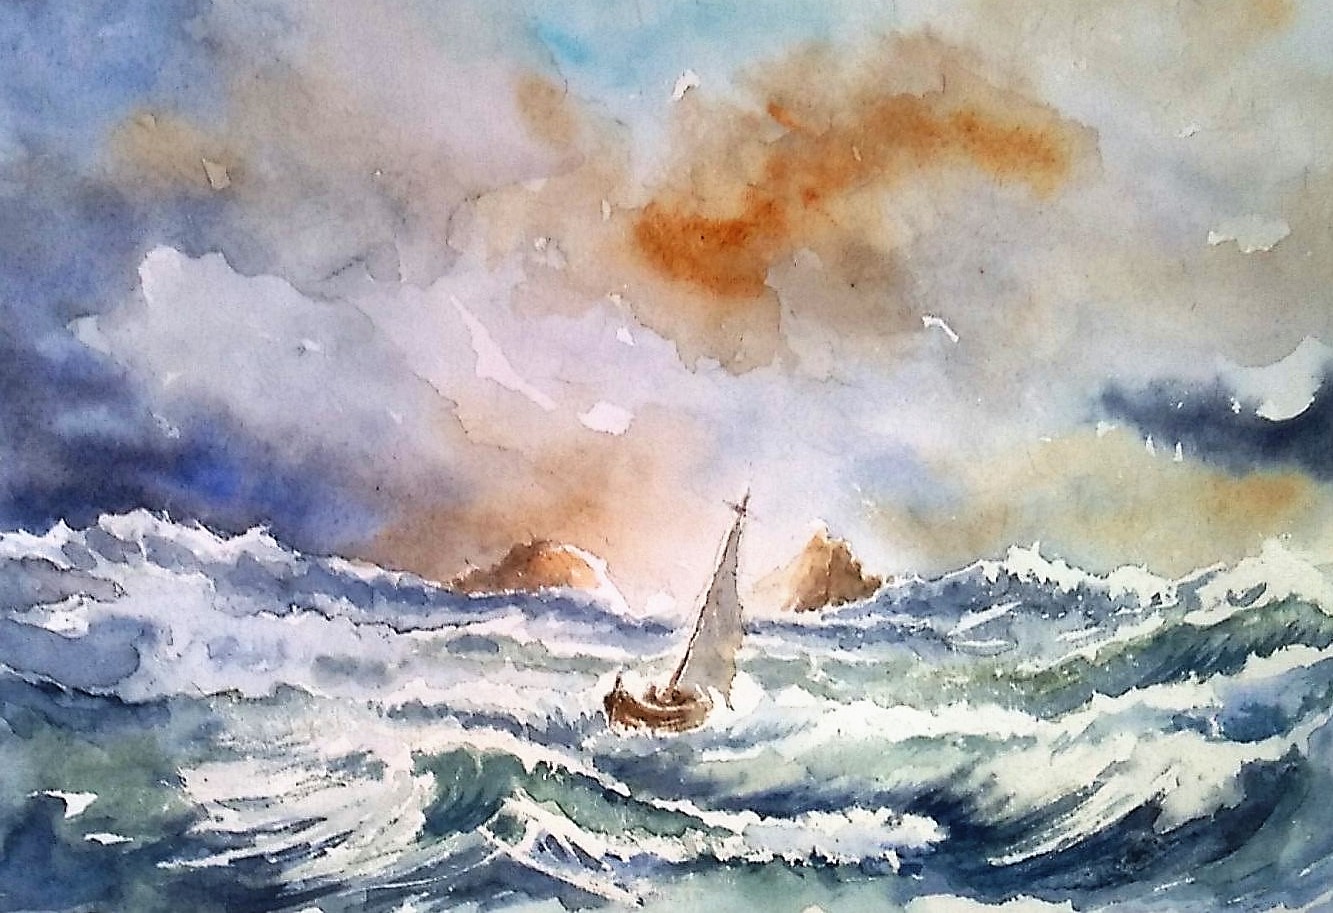 waves and boat.jpg